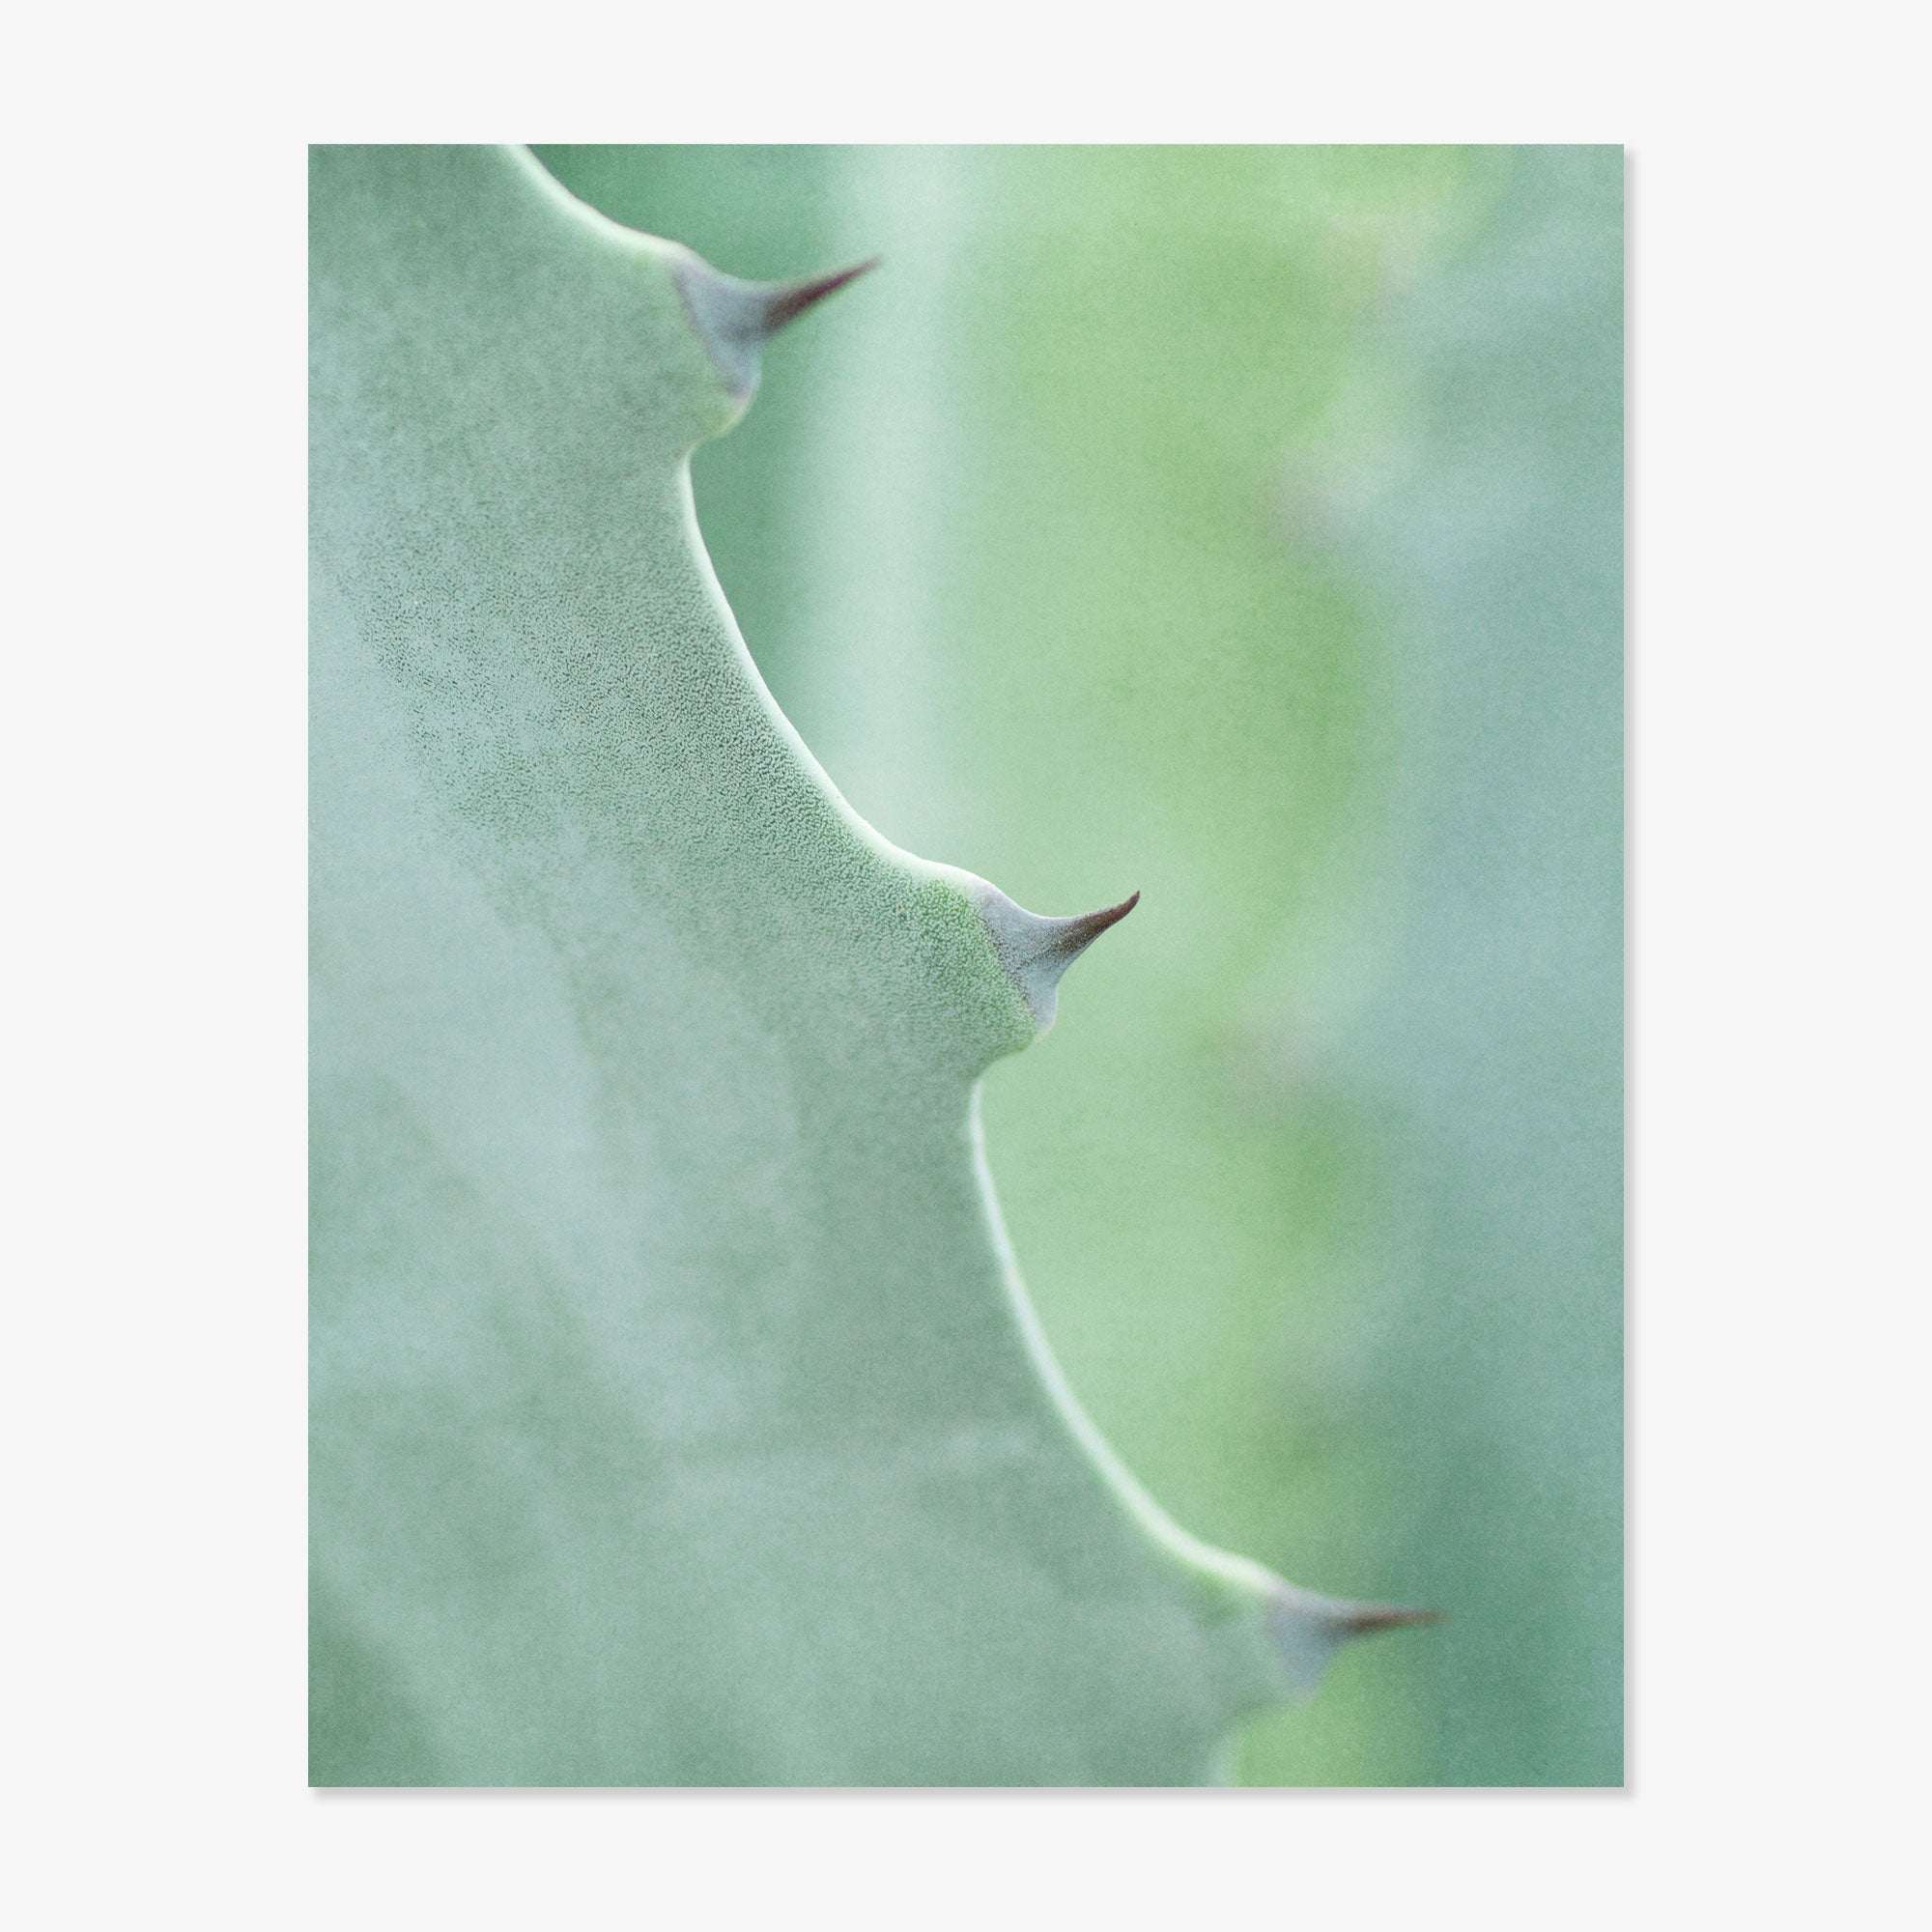 Close-up image of a green aloe vera leaf detailing its textured surface and sharp thorns along the edge, captured in desert plants photography style, with a blurred green background highlighting the leaf&#39;s contour. This is similar to Offley Green&#39;s product &quot;Green Botanical Print, &#39;Strands and Spikes II&#39;&quot;.